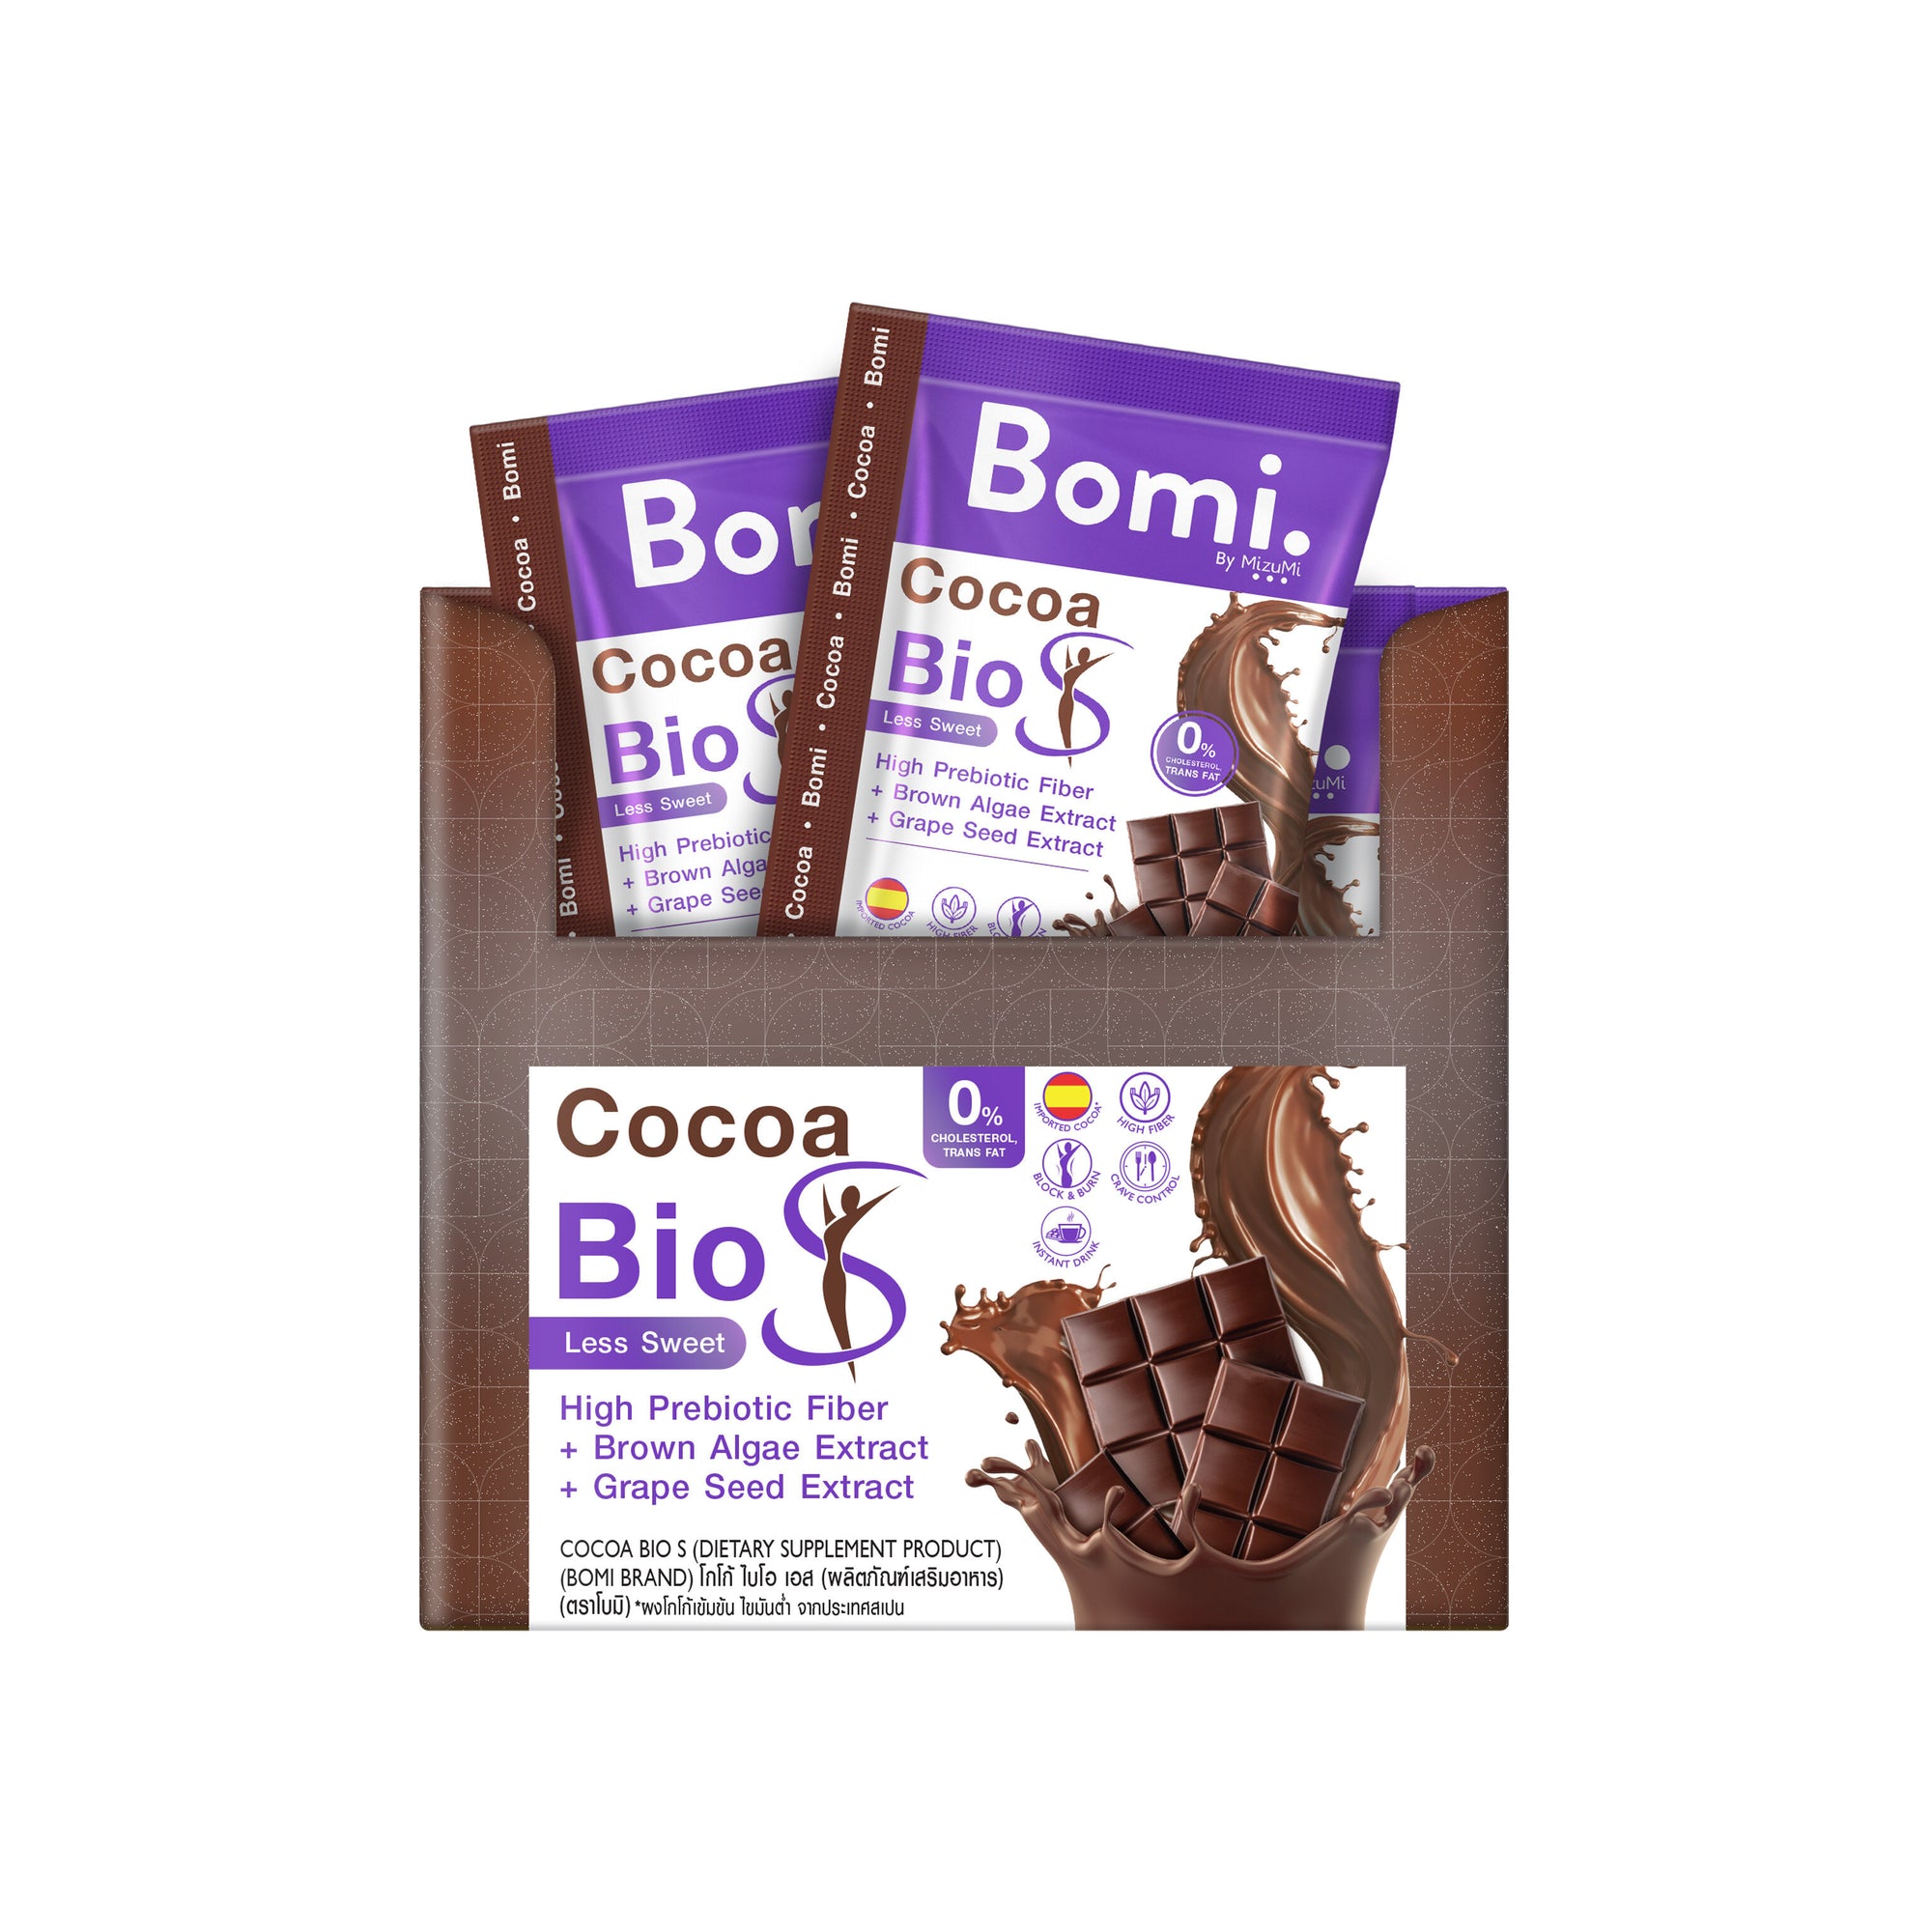 Bomi Cocoa Bio S Instant Drink with High Fiber